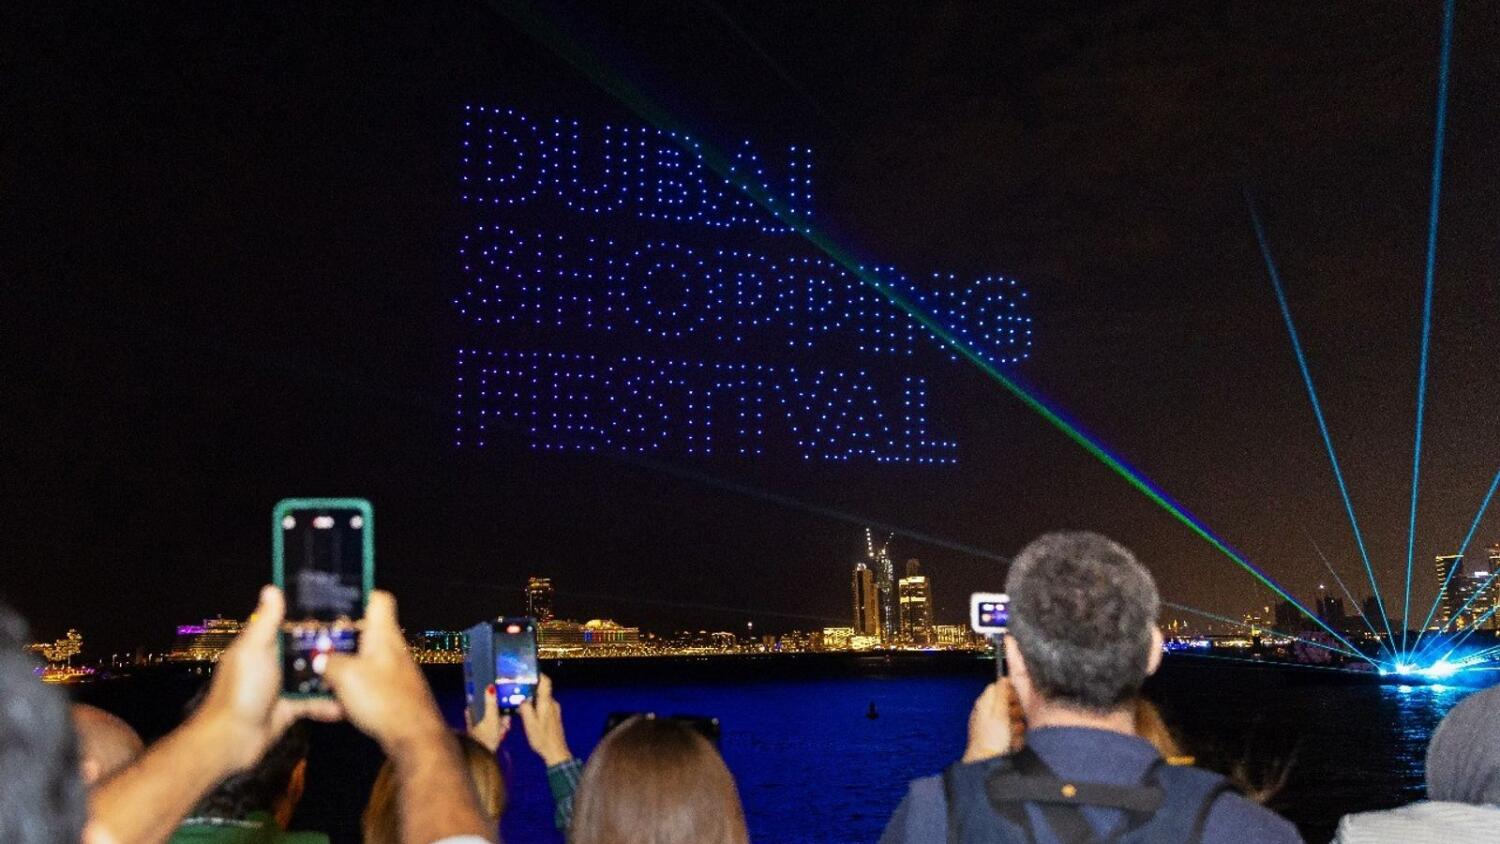 From December 8 to January 14, the Dubai Shopping Festival (DSF) lights up the city with free art exhibits.